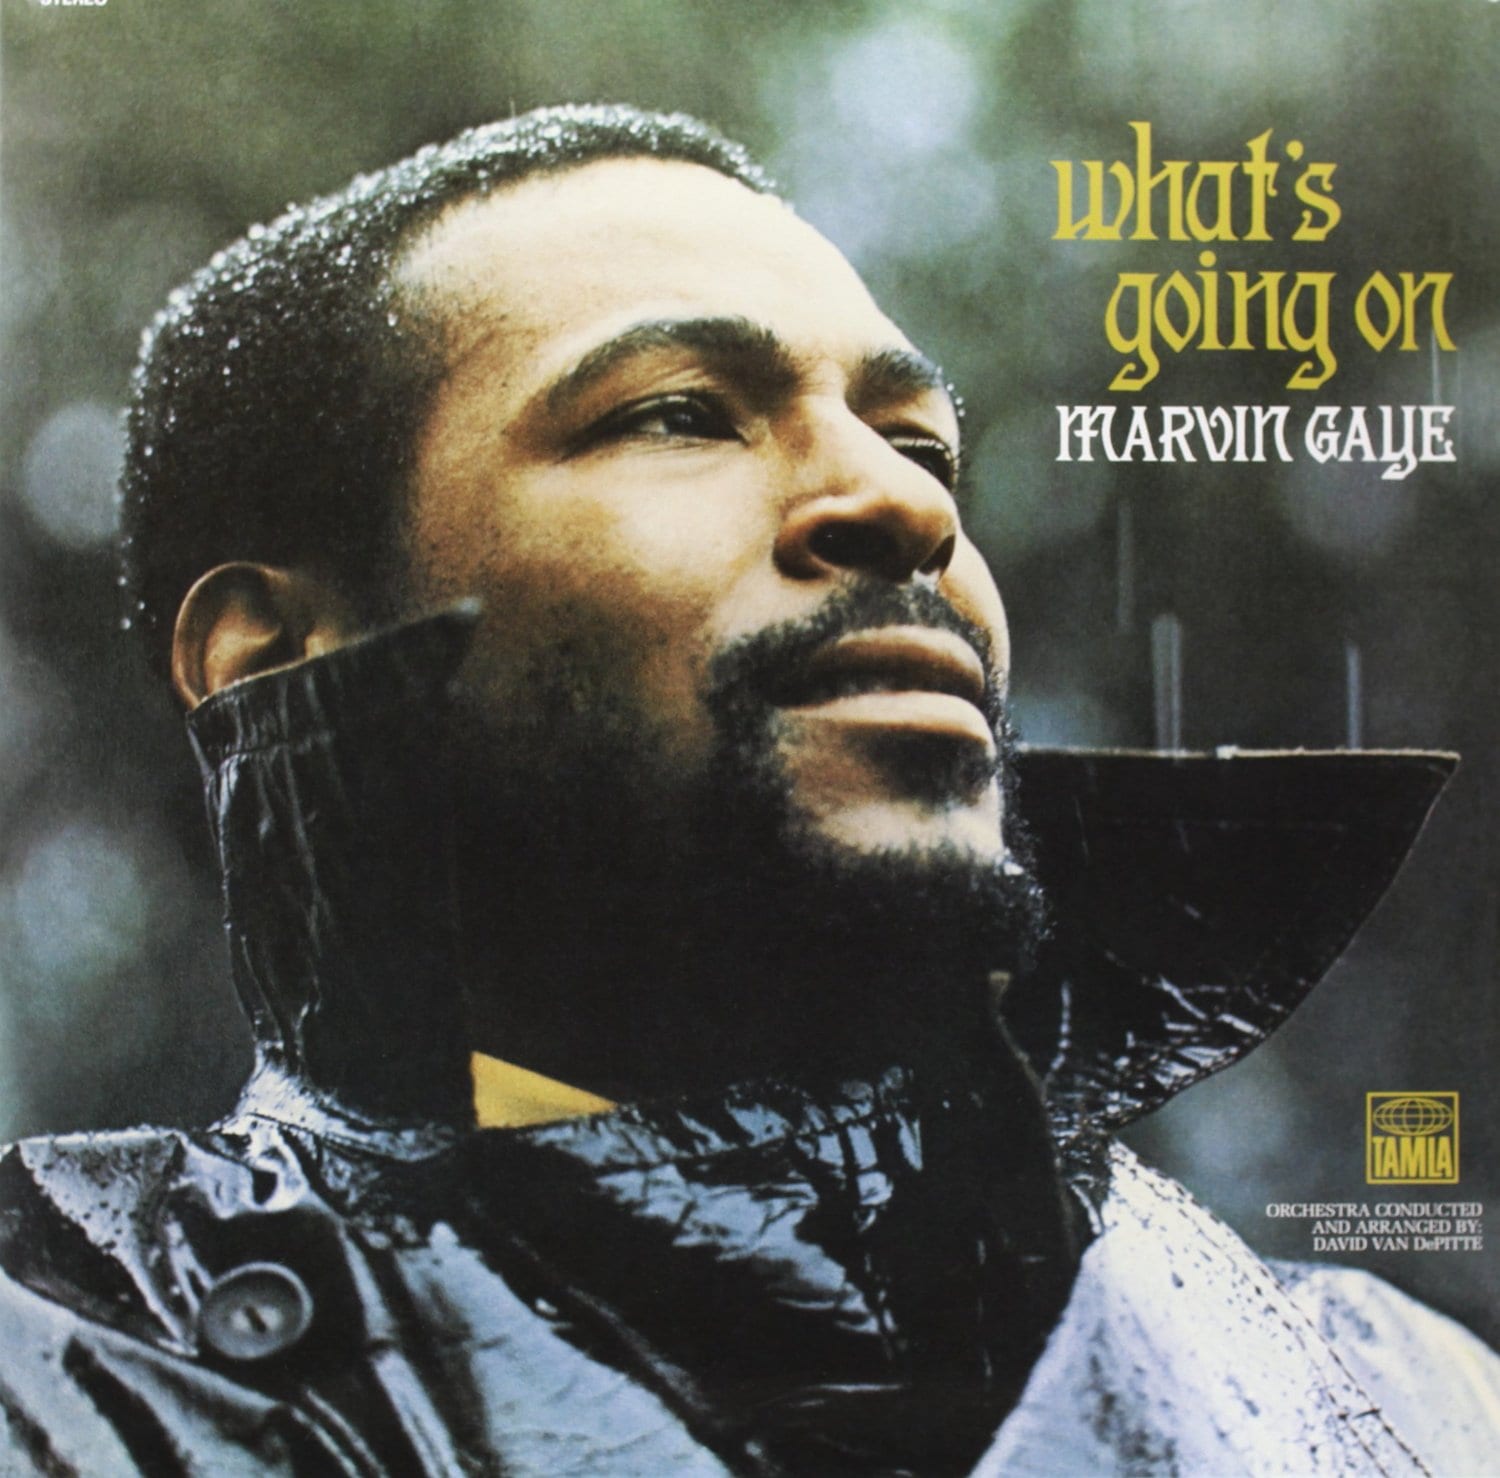 whats-going-on-marvin-gaye-vinyl-record-2017-2018